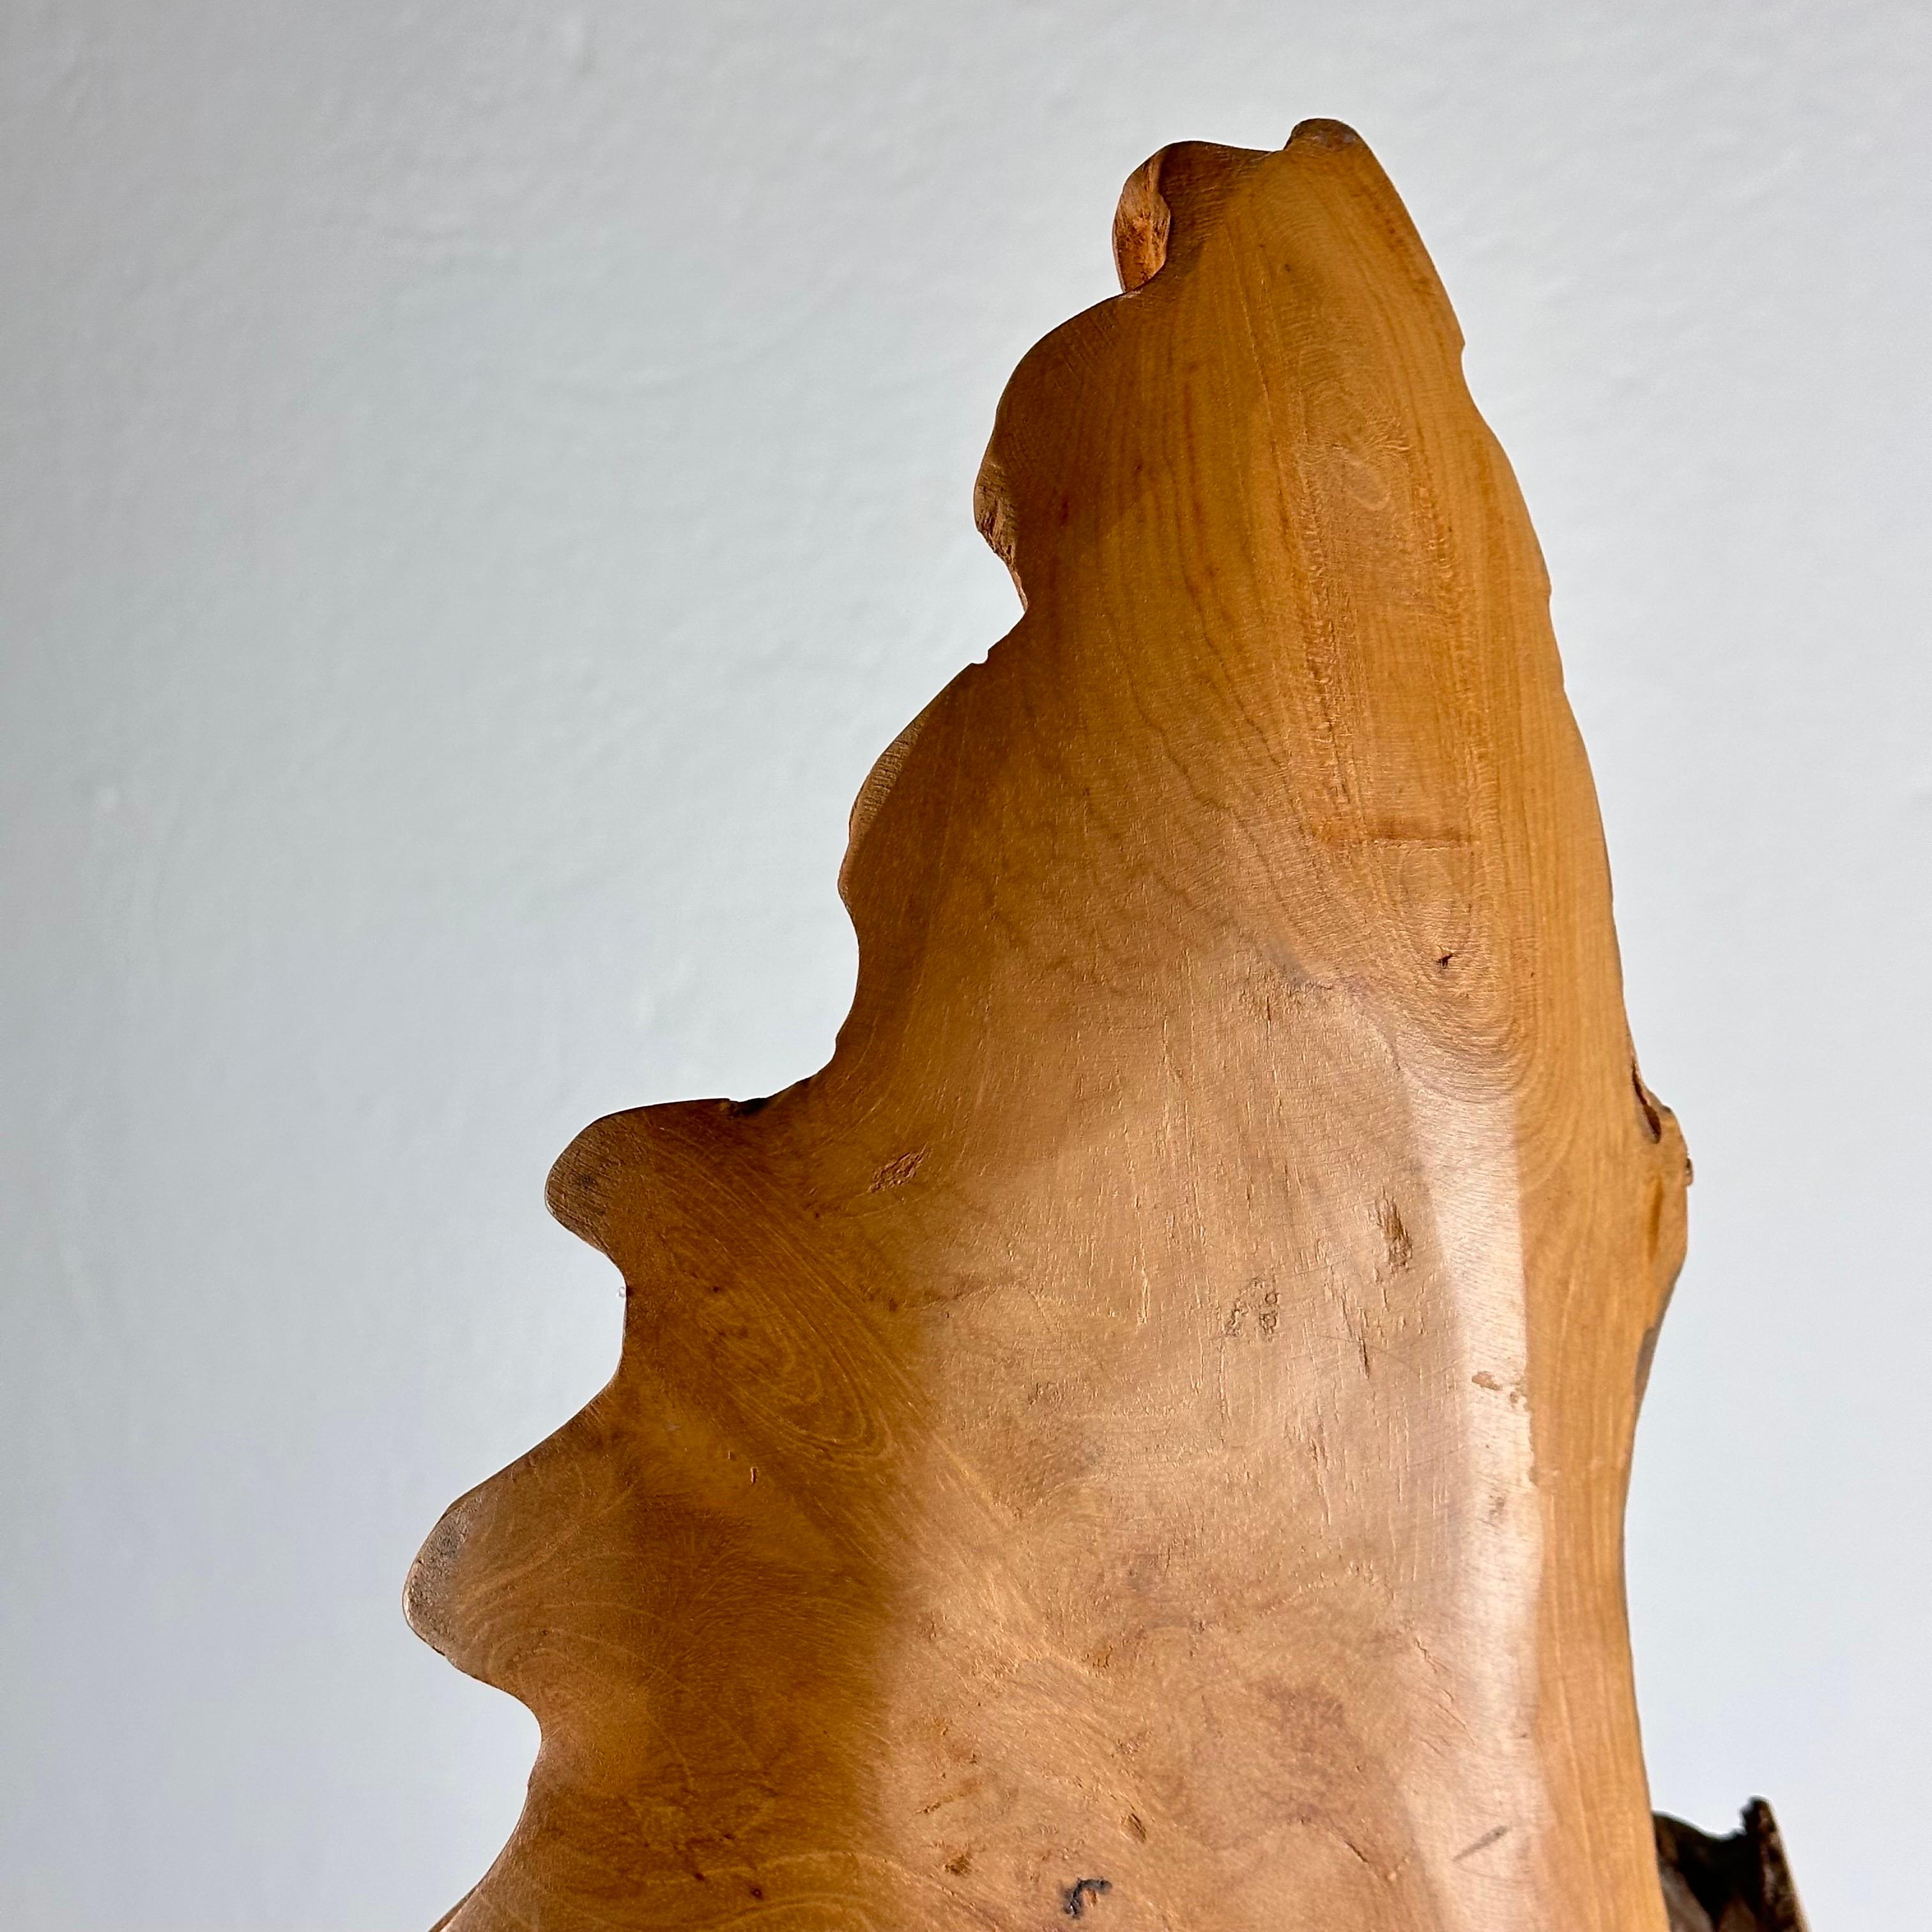 Exquisite Italian Phytomorphic Abstract Sculpture in Natural Ash, 1960s For Sale 10